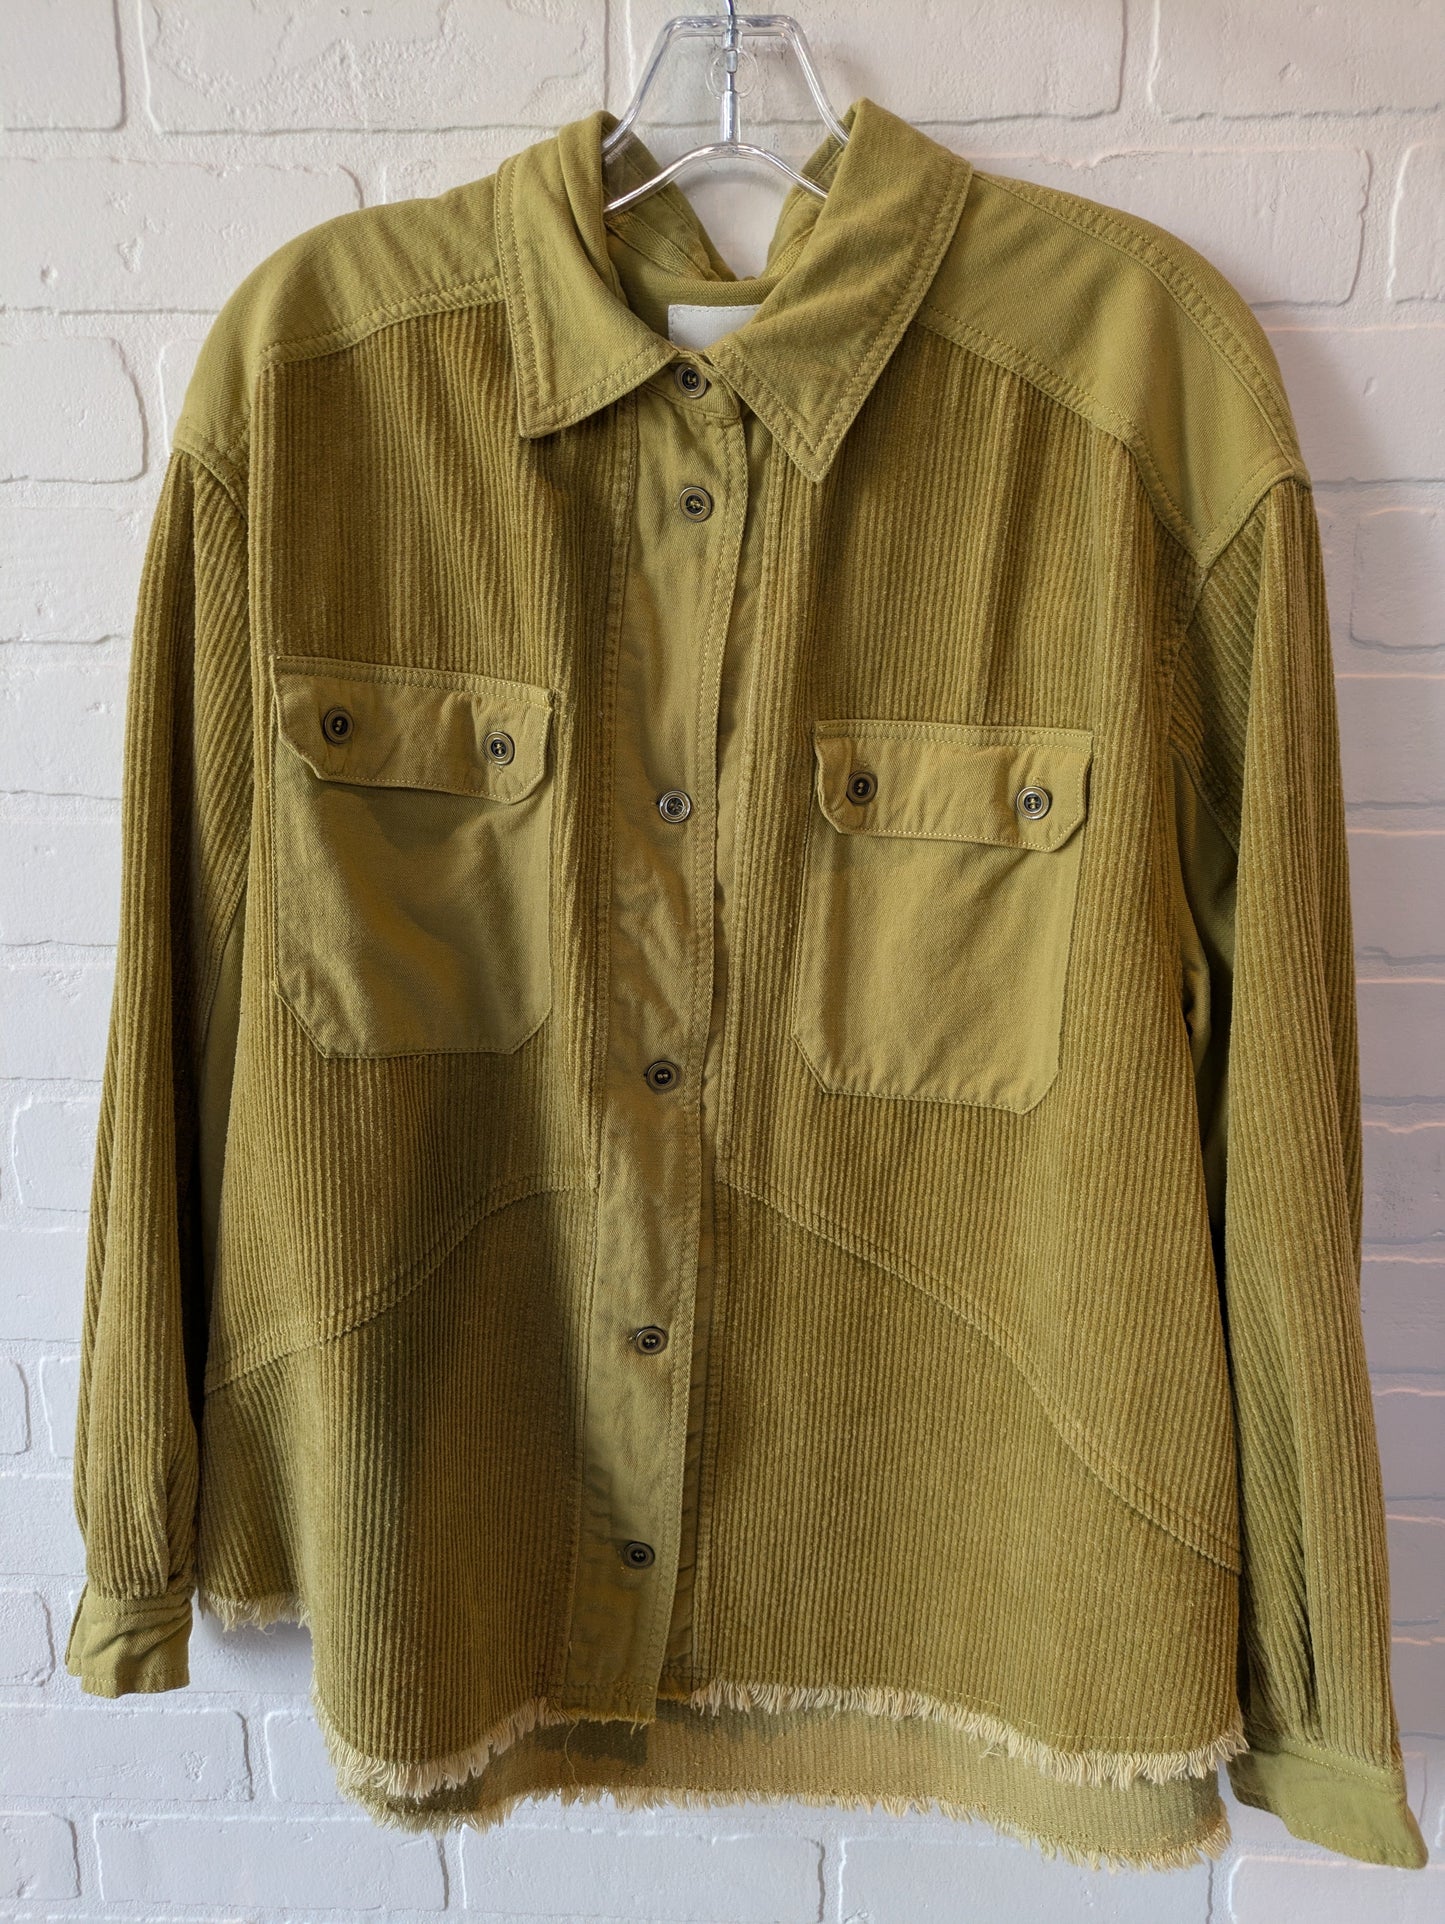 Green Jacket Shirt Thread And Supply, Size S